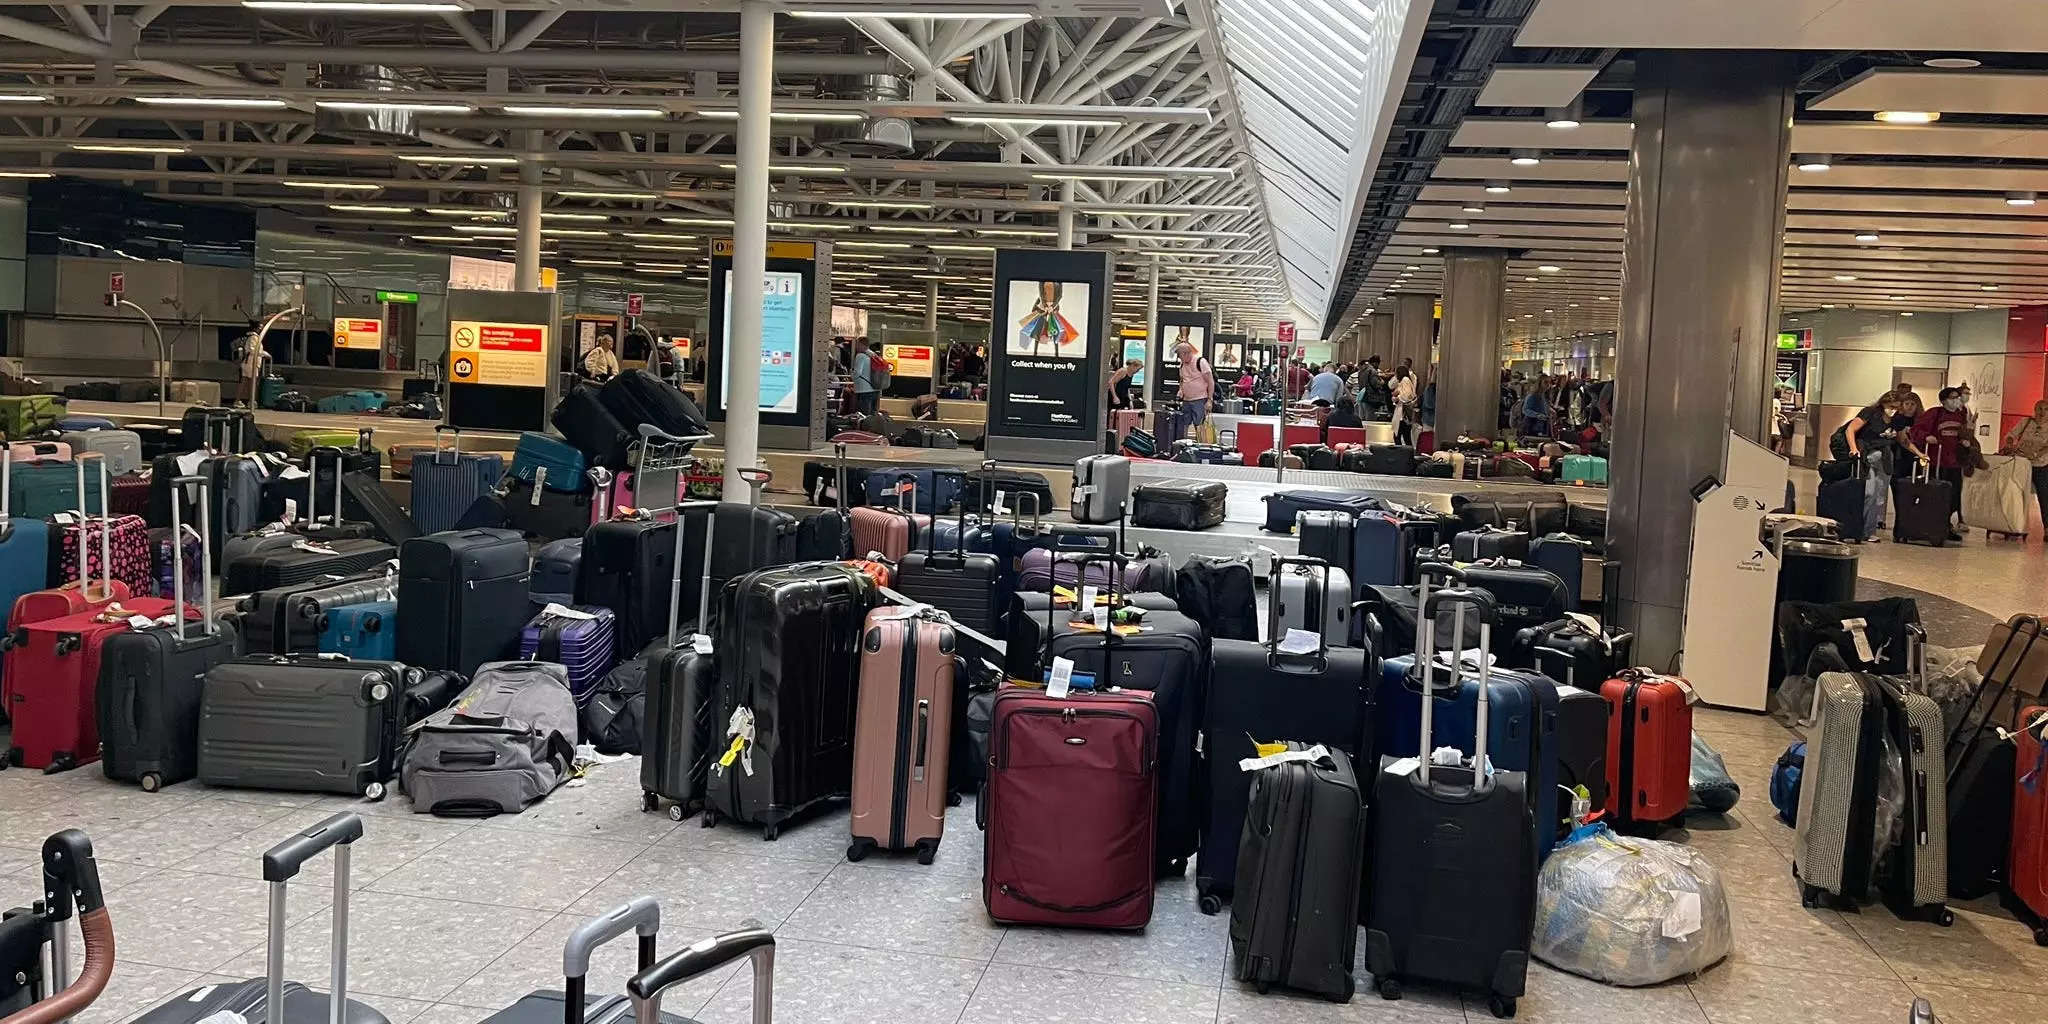 'A disaster from start to finish': Cruise passengers say airline havoc and lost luggage have turned relaxing vacations into a stressful ordeal